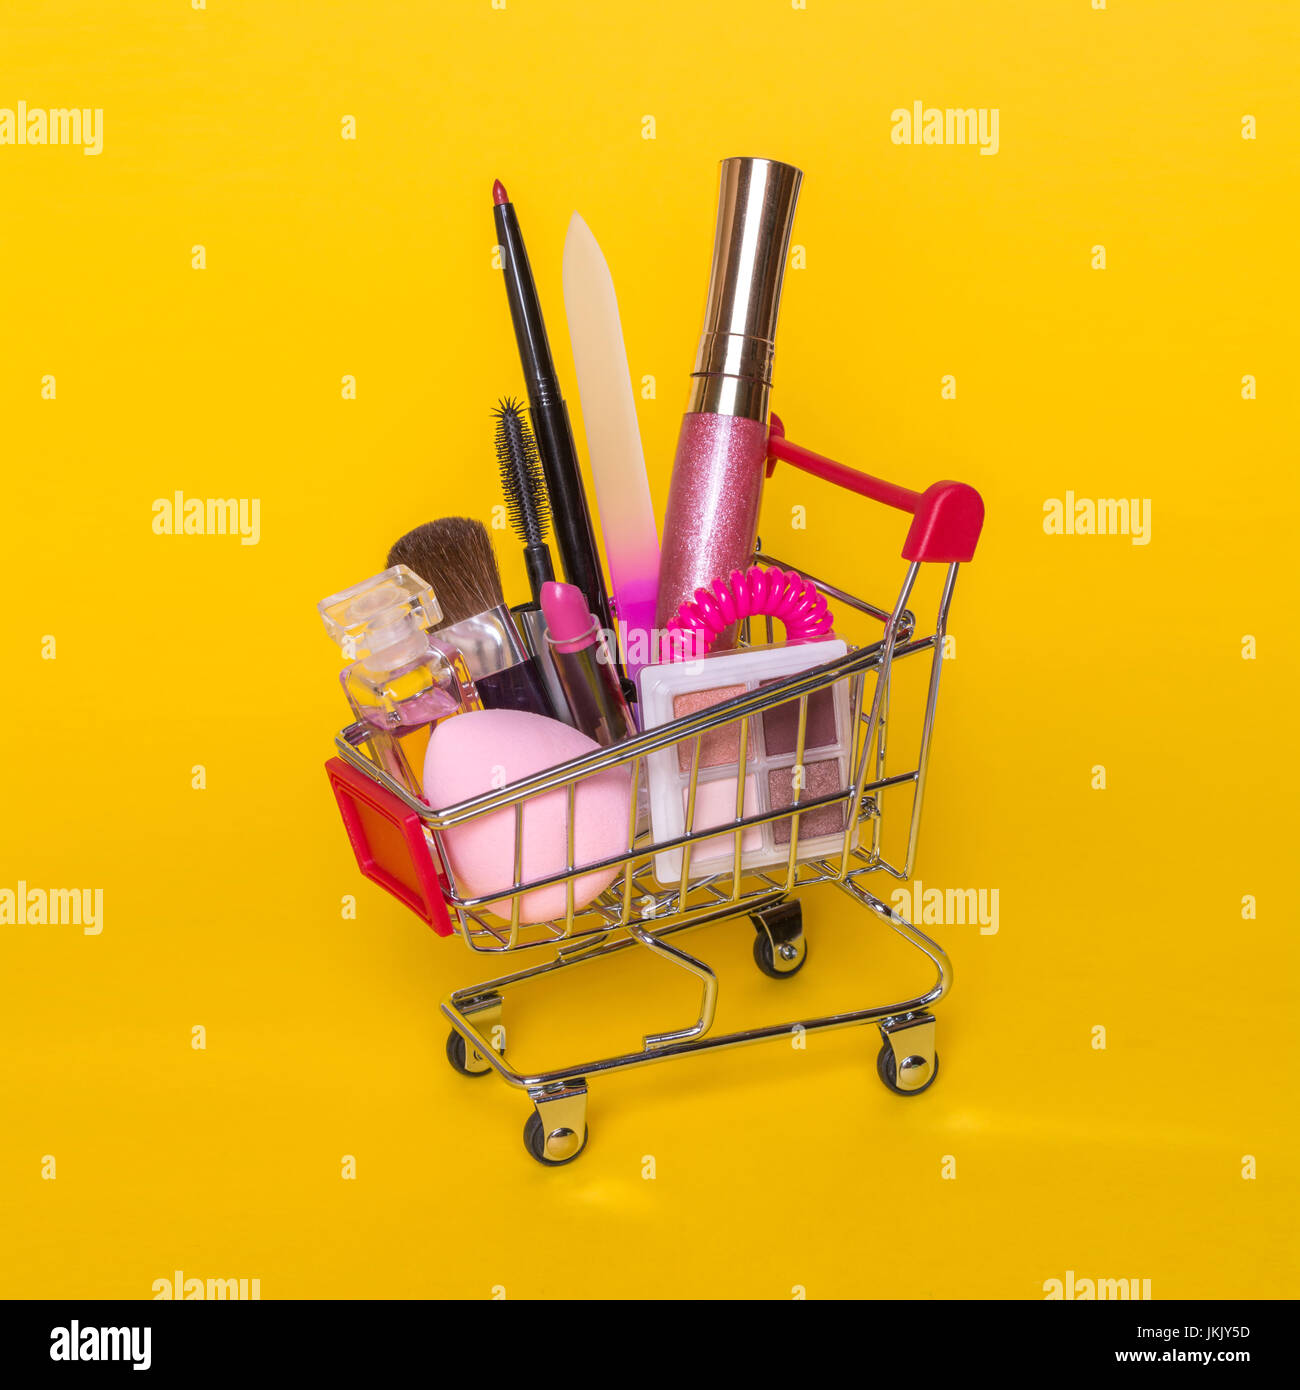 Creative concept with shopping trolley with makeup on a yellow background. Perfume, sponge, brush, mascara, pencil, nail file, eye shadow, lip gloss i Stock Photo